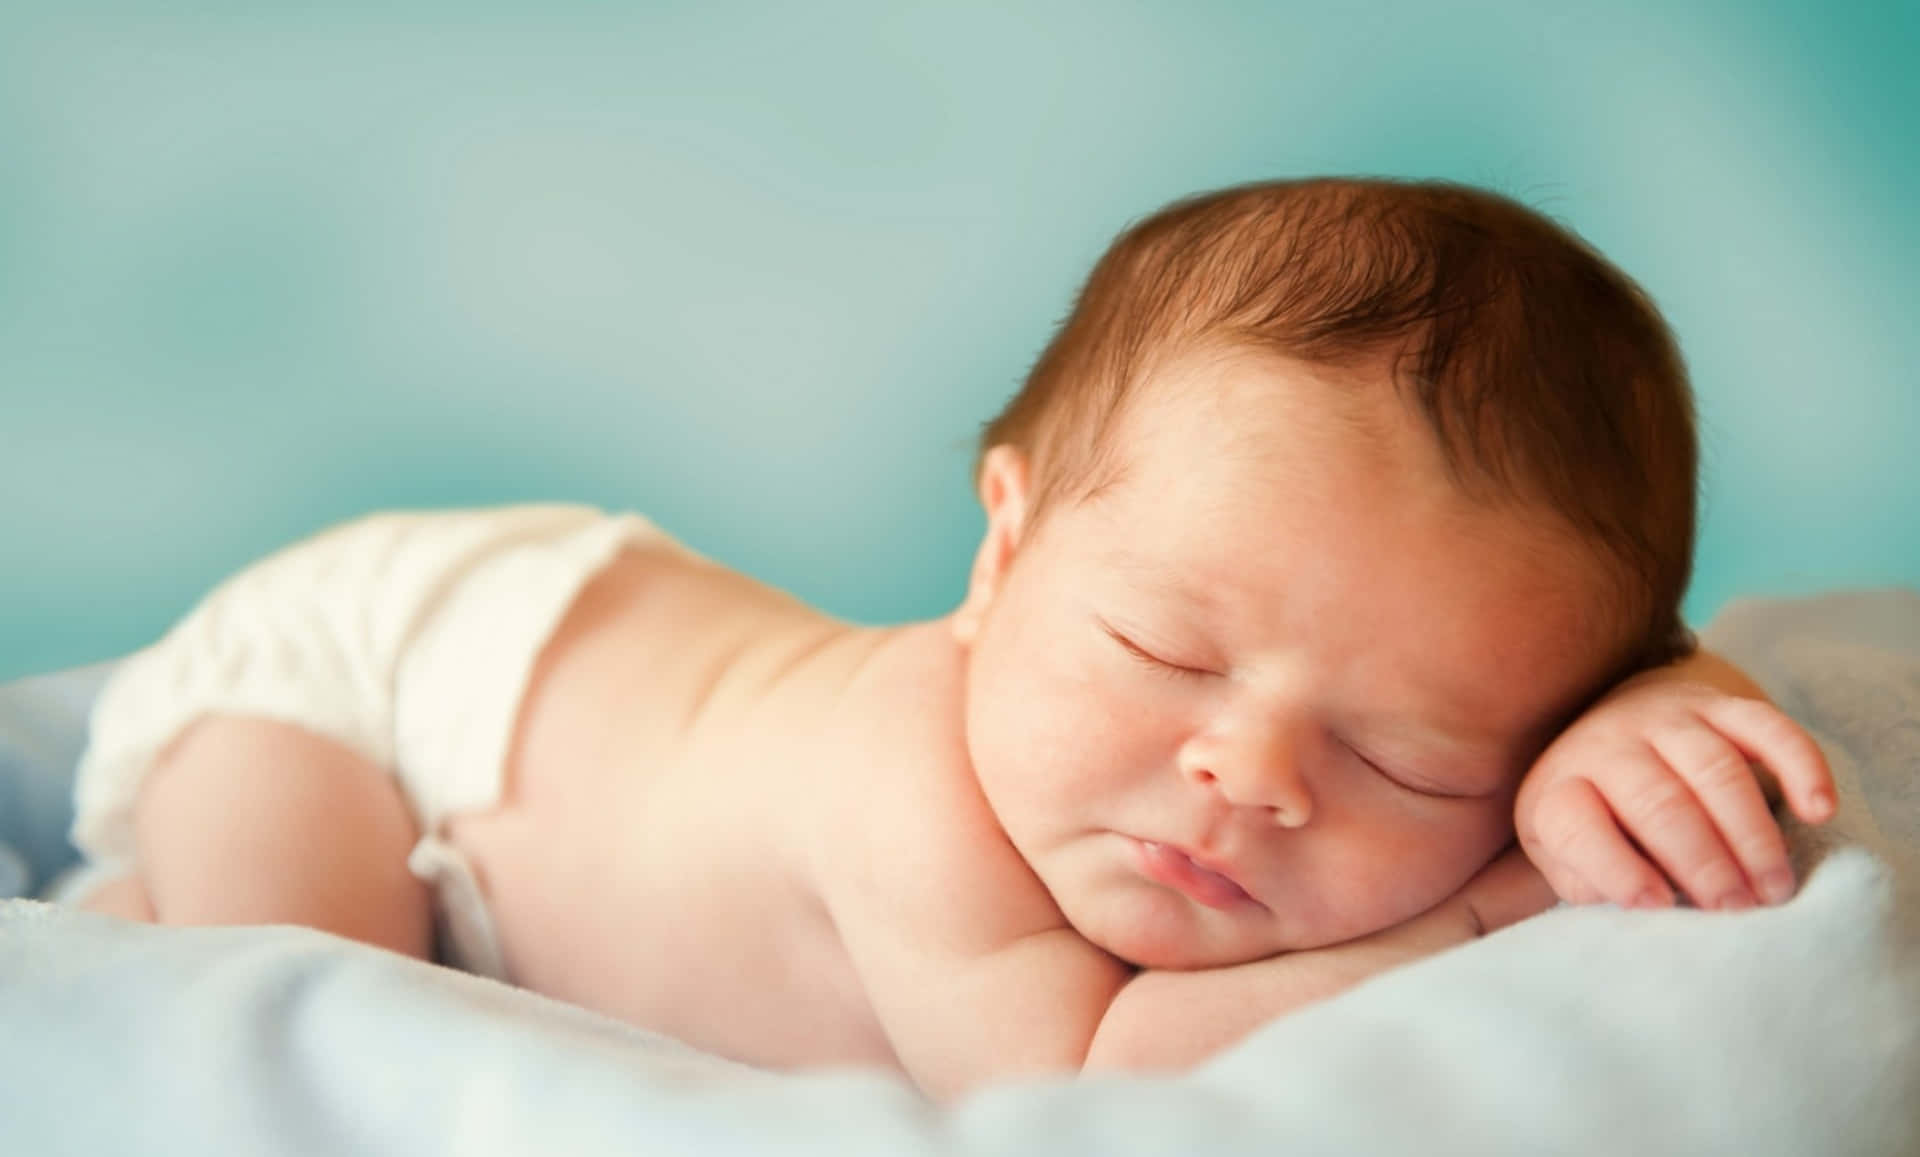 "Adorable infant sleeping peacefully"